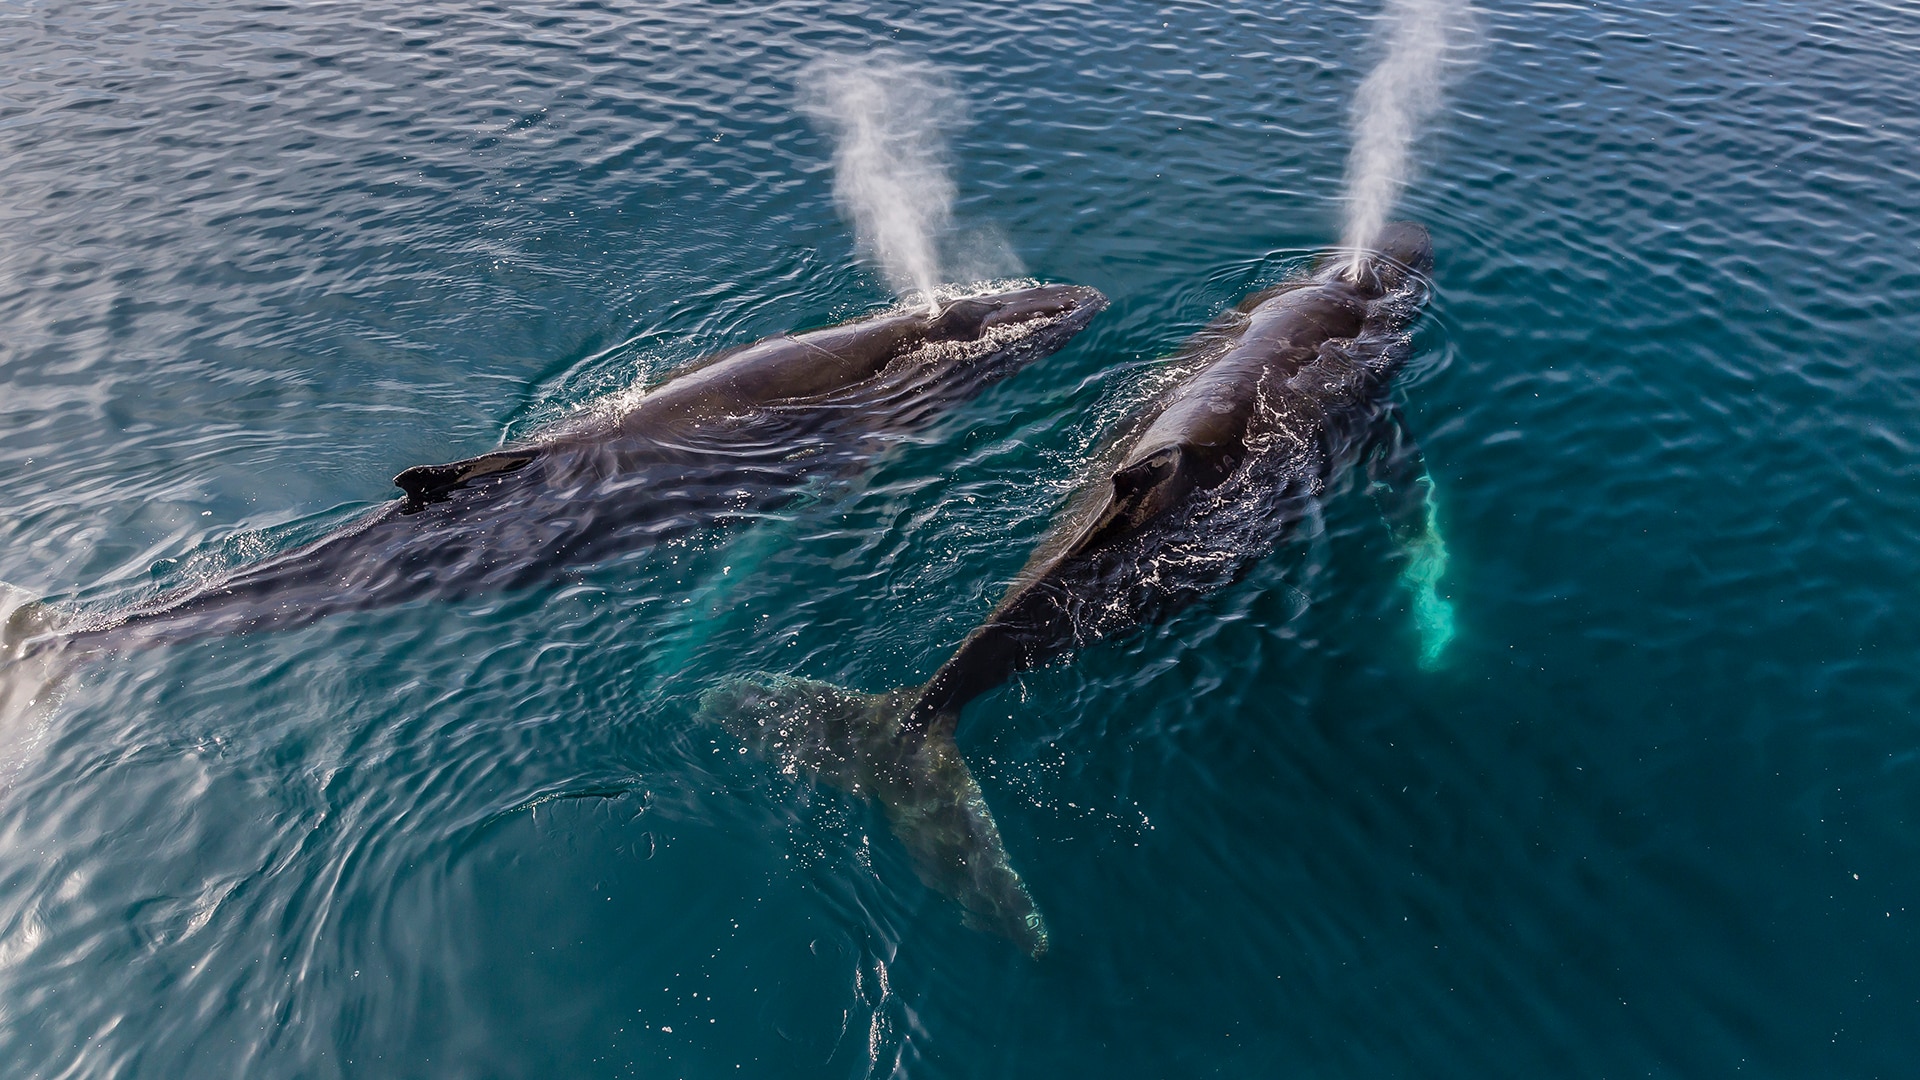 A pair of adult humpback whales surfacing in the Gerlache Strait, Antarctica.